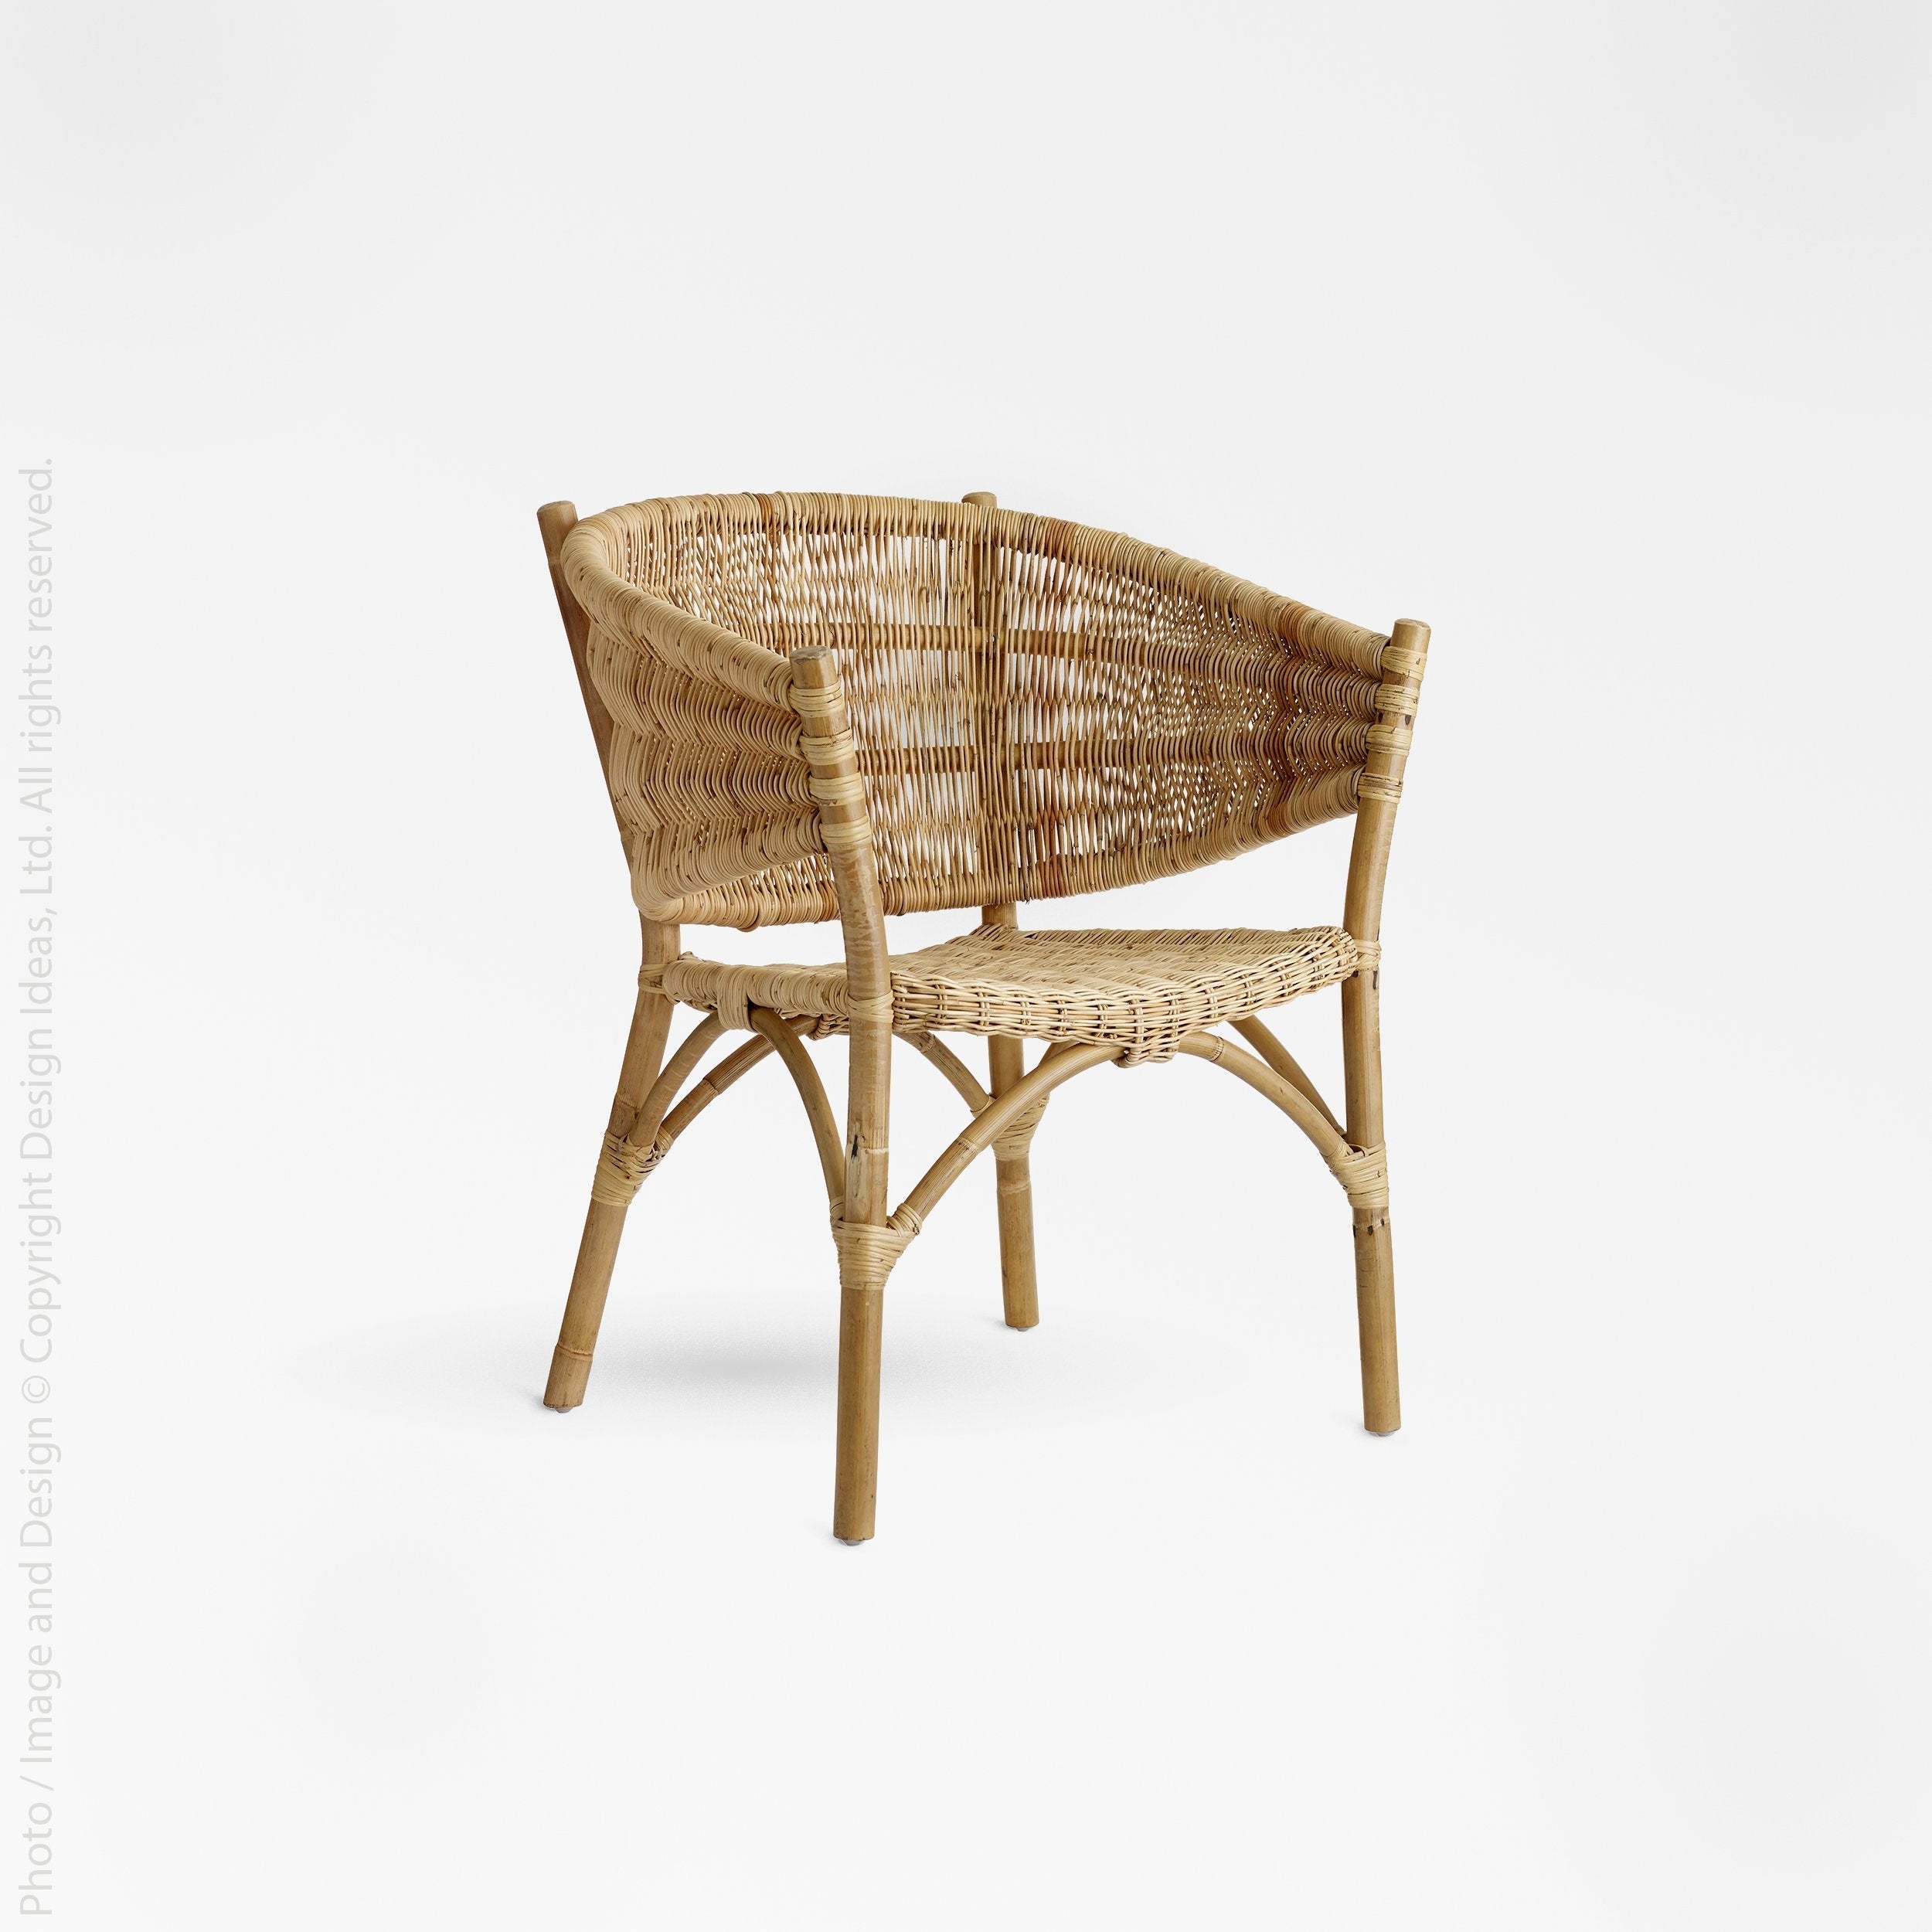 Avello Rattan Arm Chair - Natural Color | Image 1 | From the Avello Collection | Elegantly constructed with natural rattan for long lasting use | Available in natural color | texxture home